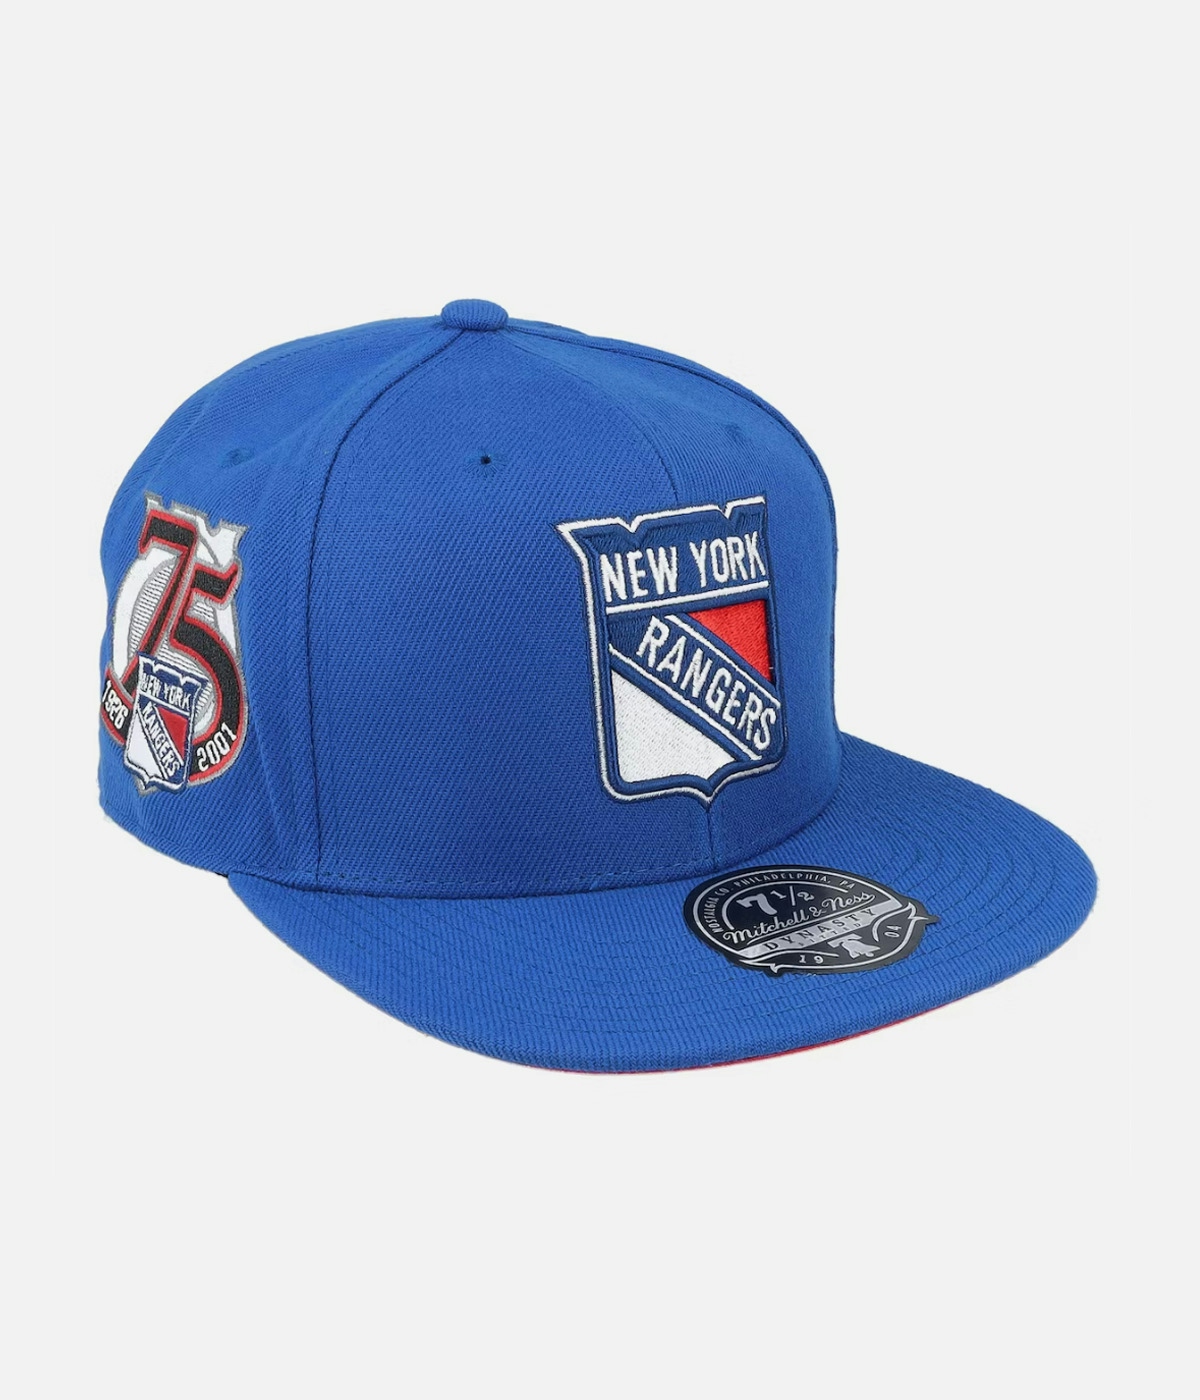 Mitchell & Ness Vintage Fitted - New York Rangers Cap Blue 1